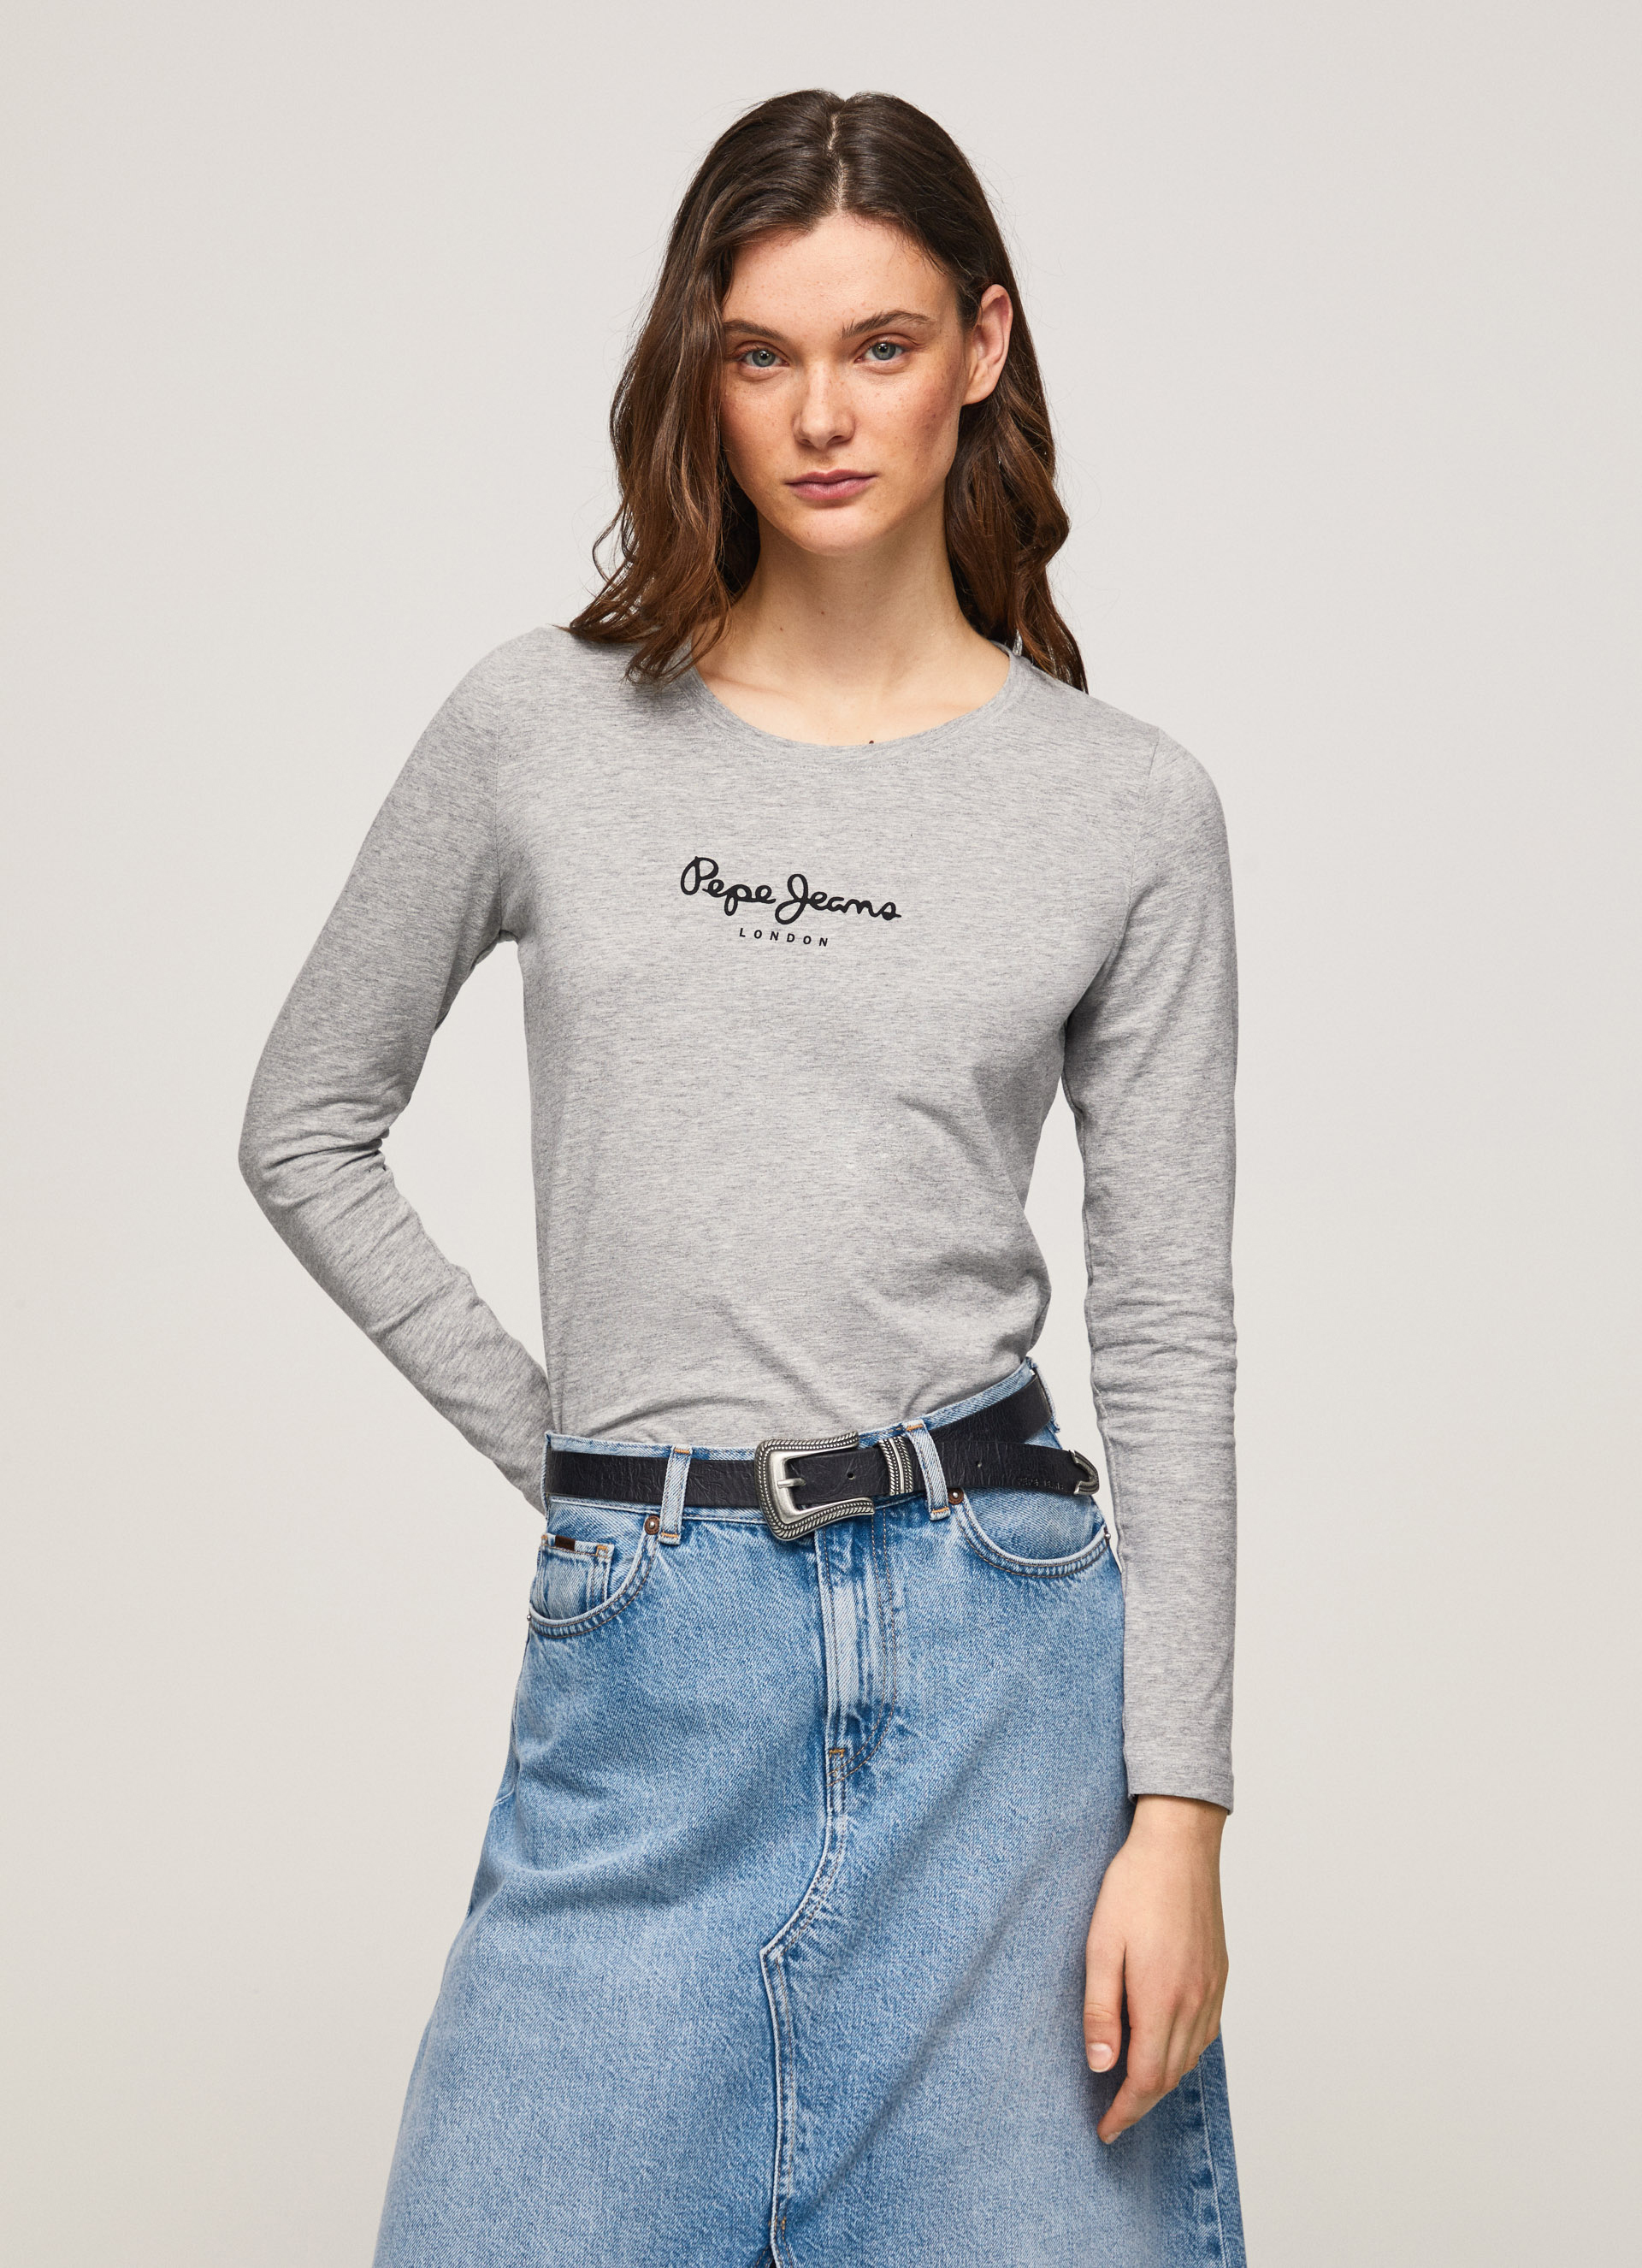 Tee Shirts Manches Longues ▷ Mode Femme | PEPE JEANS